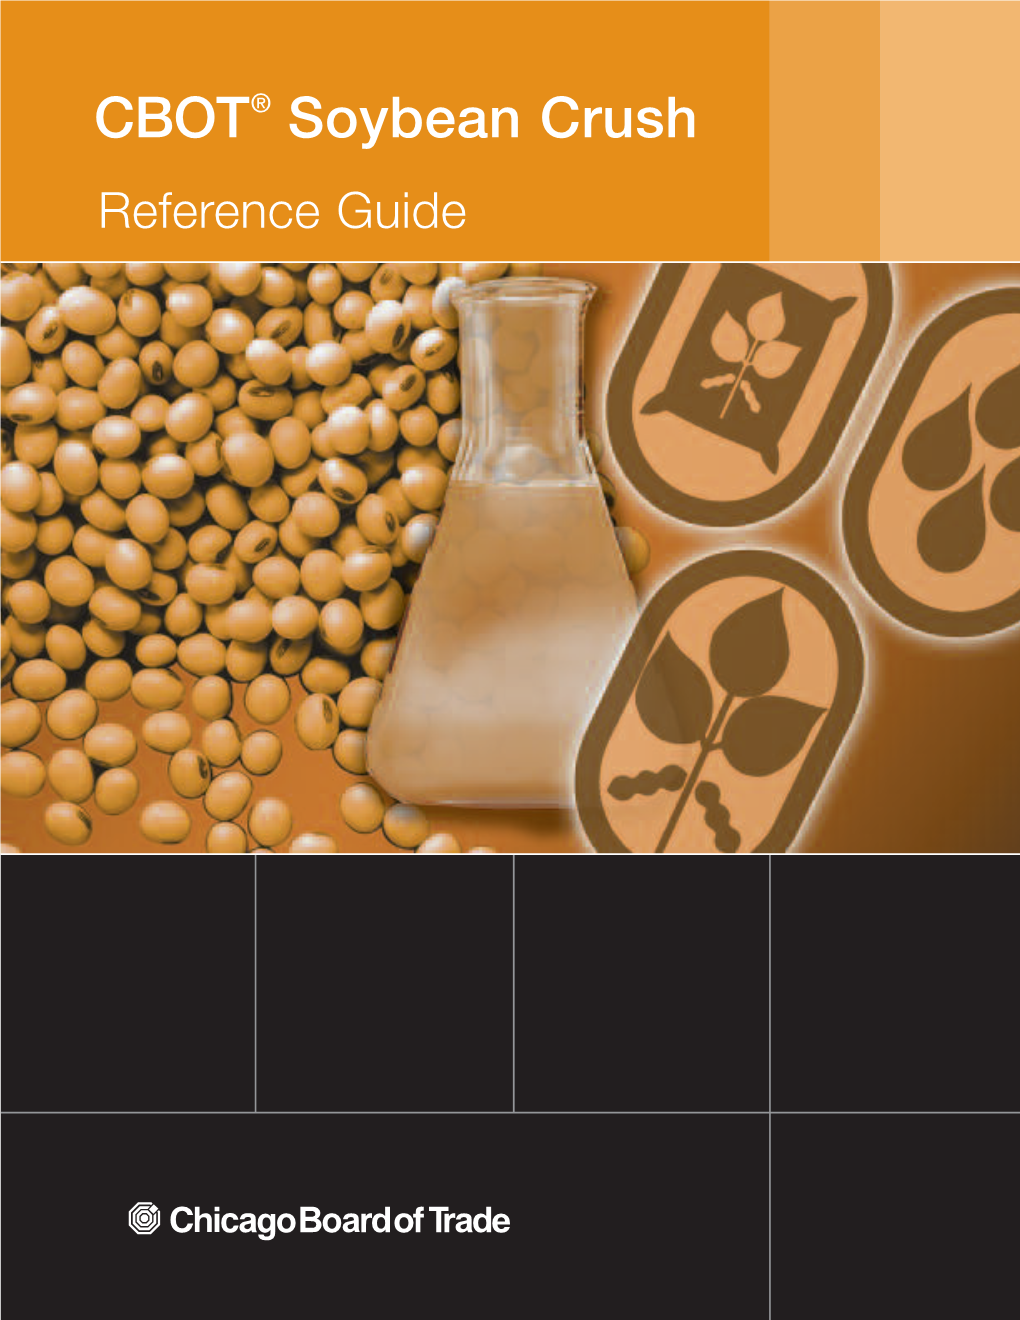 CBOT® Soybean Crush Reference Guide